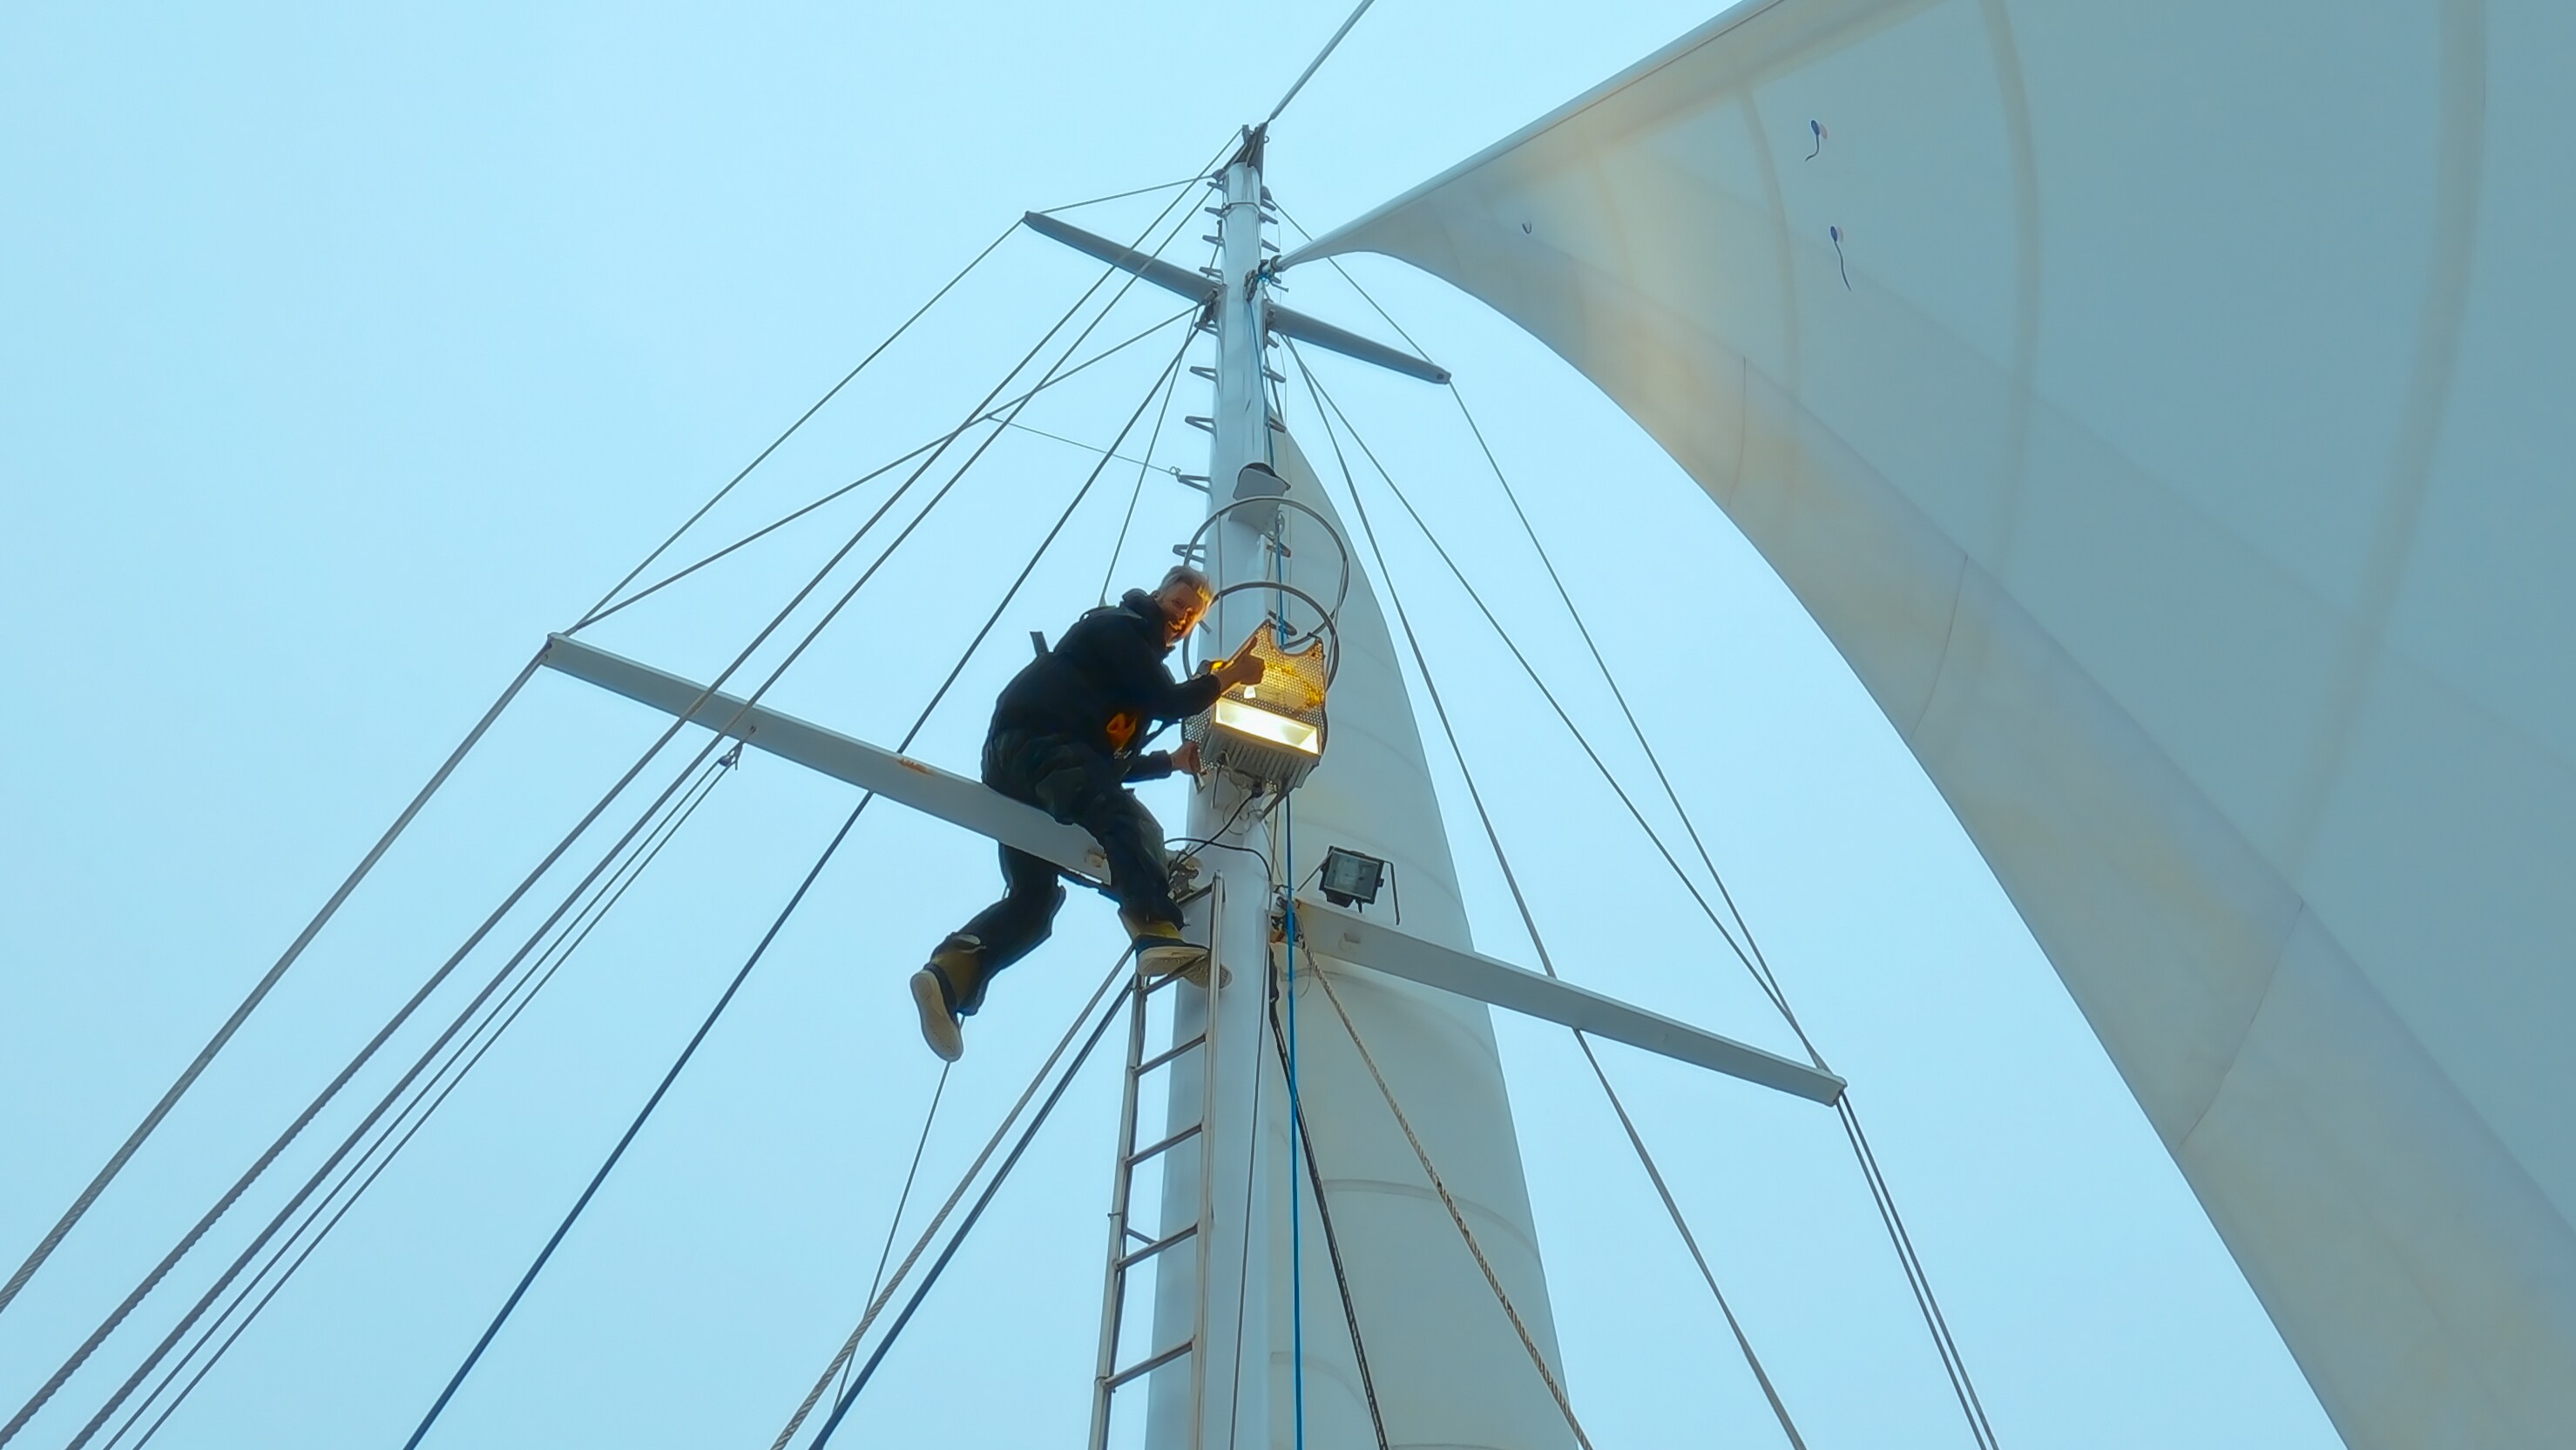 Crew member working on boat. (Credit: National Geographic/Bertie Gregory for Disney+)